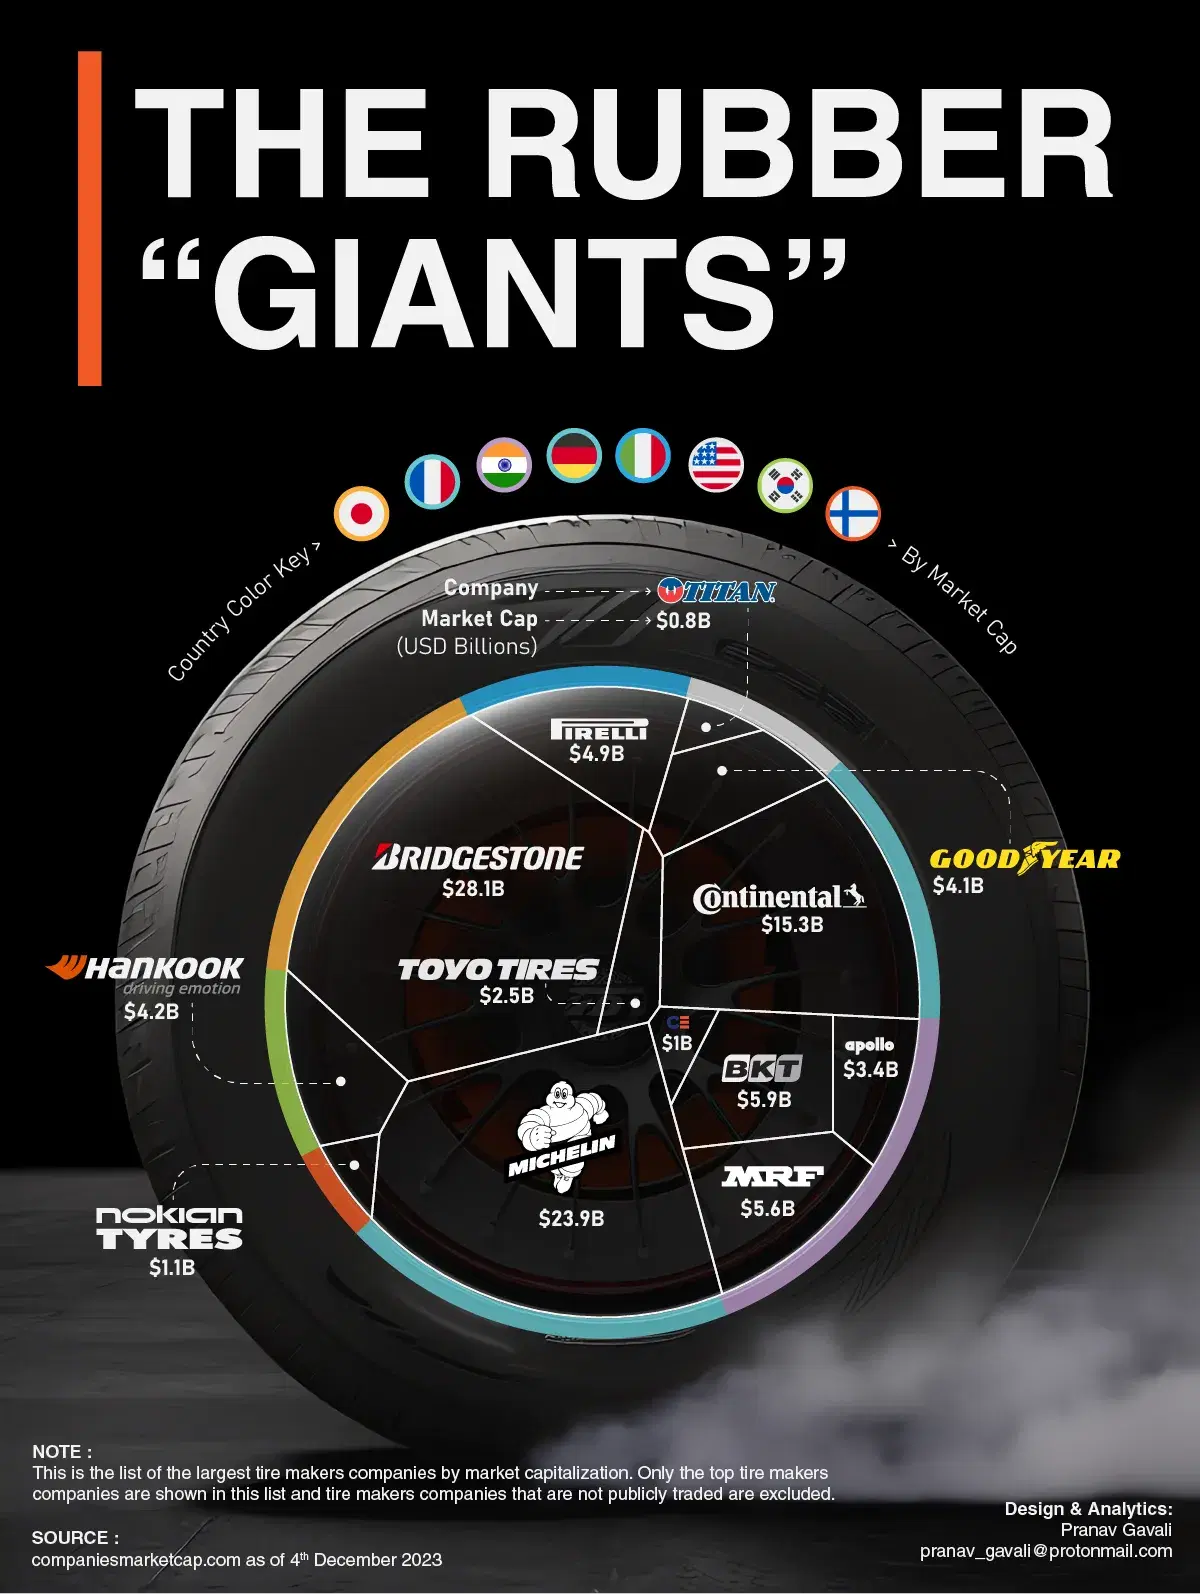 Rolling Giants: A Financial Portrait of the World's Top Tire Manufacturers